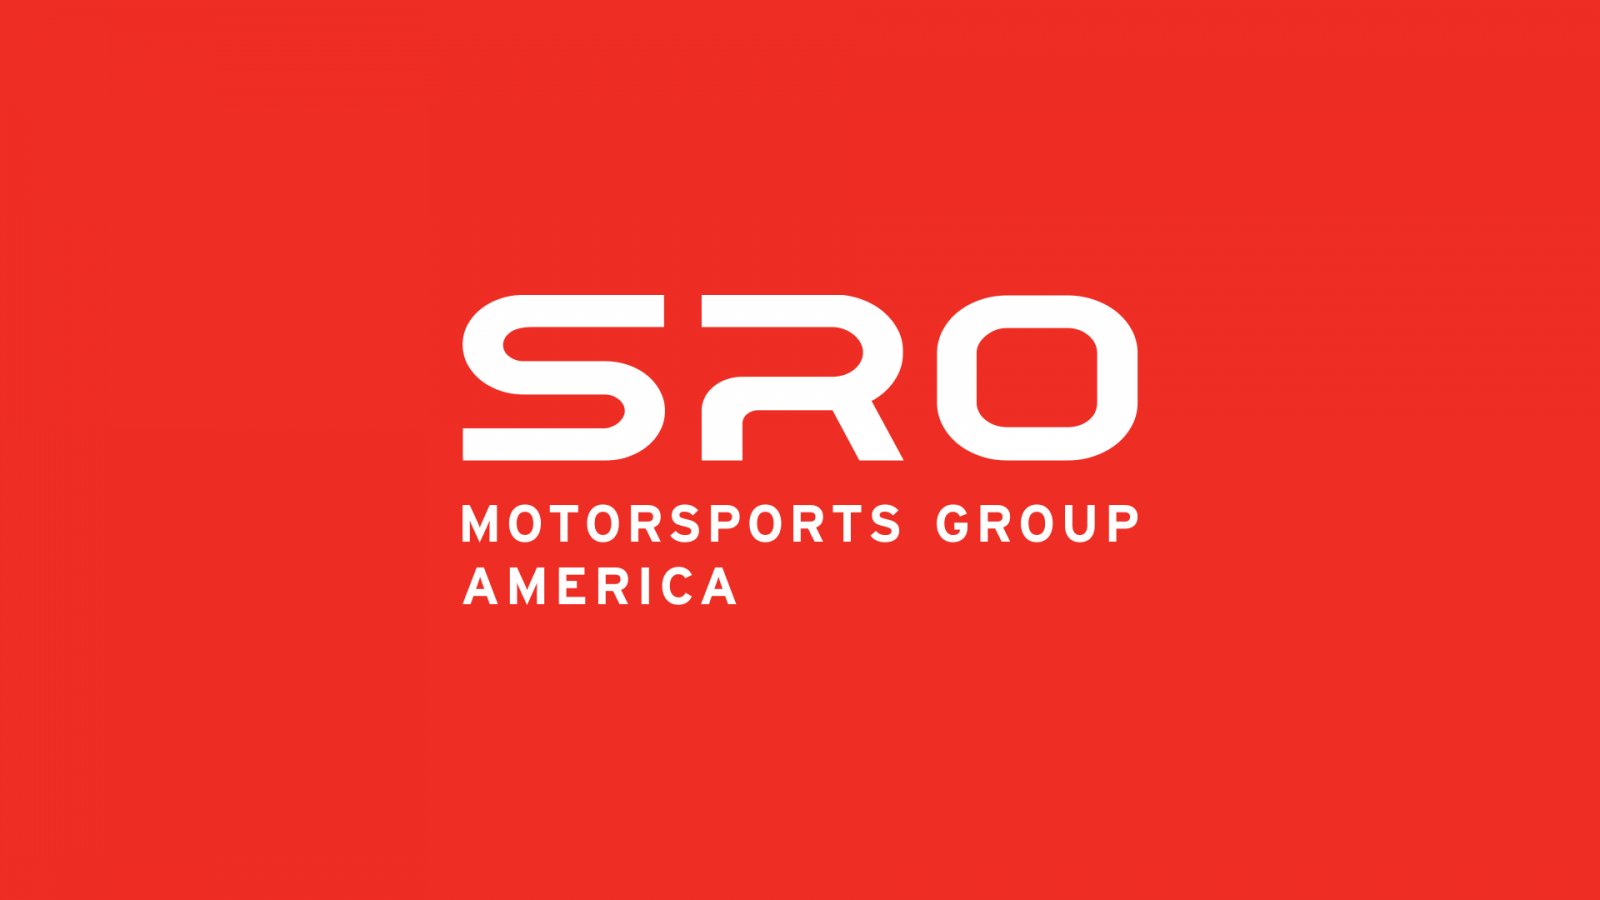 SRO America Plans to Complete All Rounds in 2020